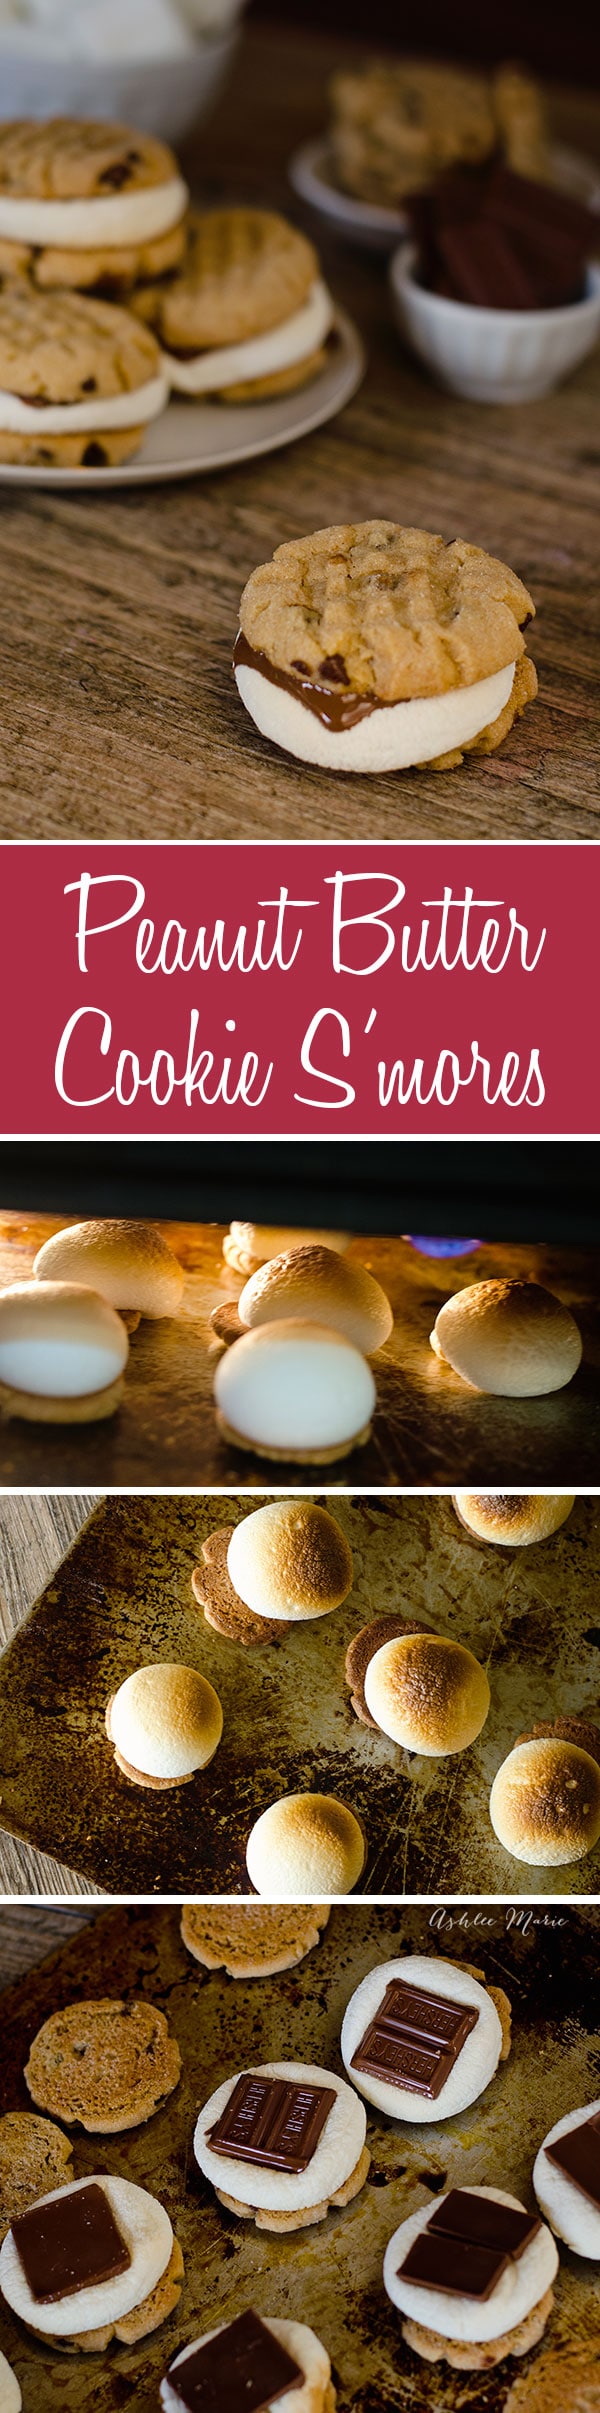 oven baked peanut butter cookie Smores. Easy to make and they taste amazing, One of our favorite summer treats